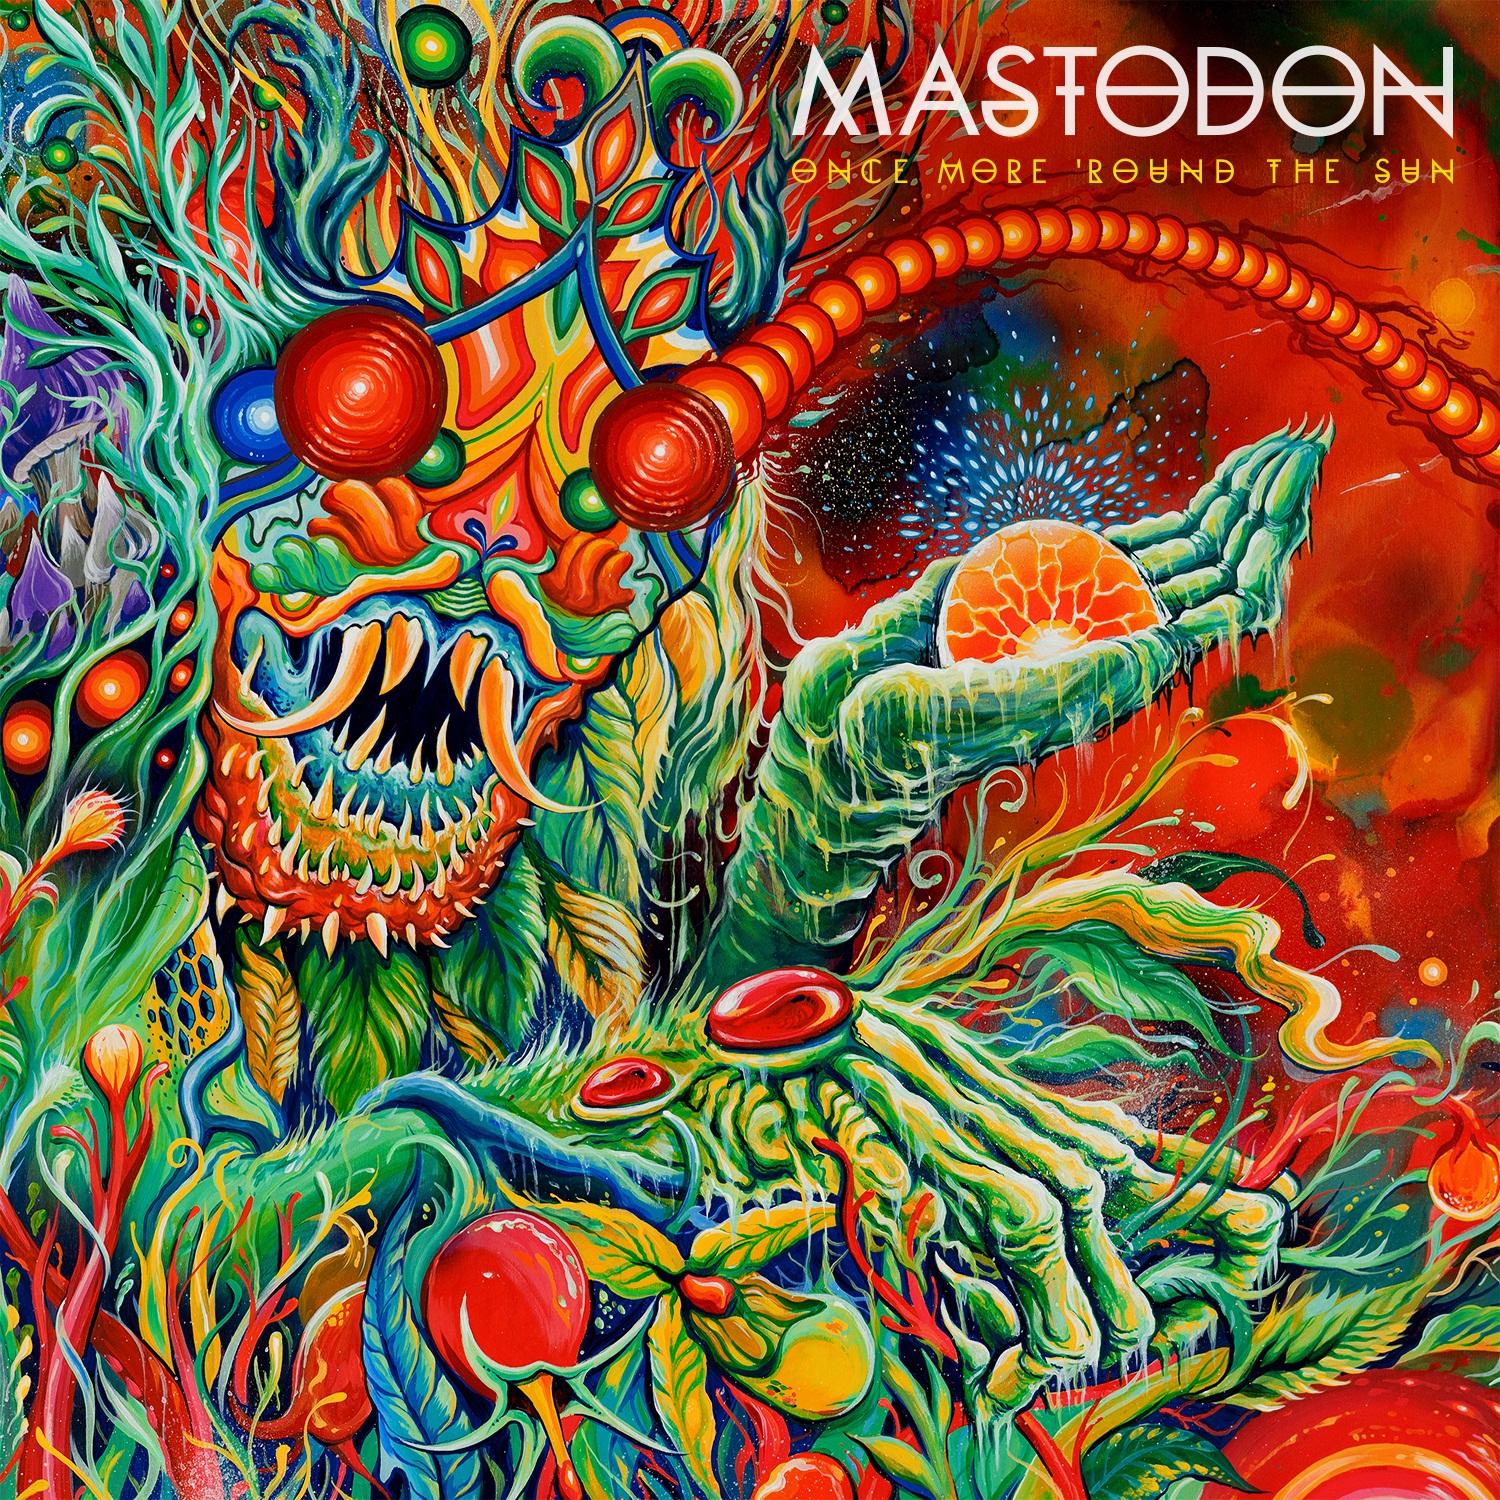 Mastodon Once More 'Rounds the Sun